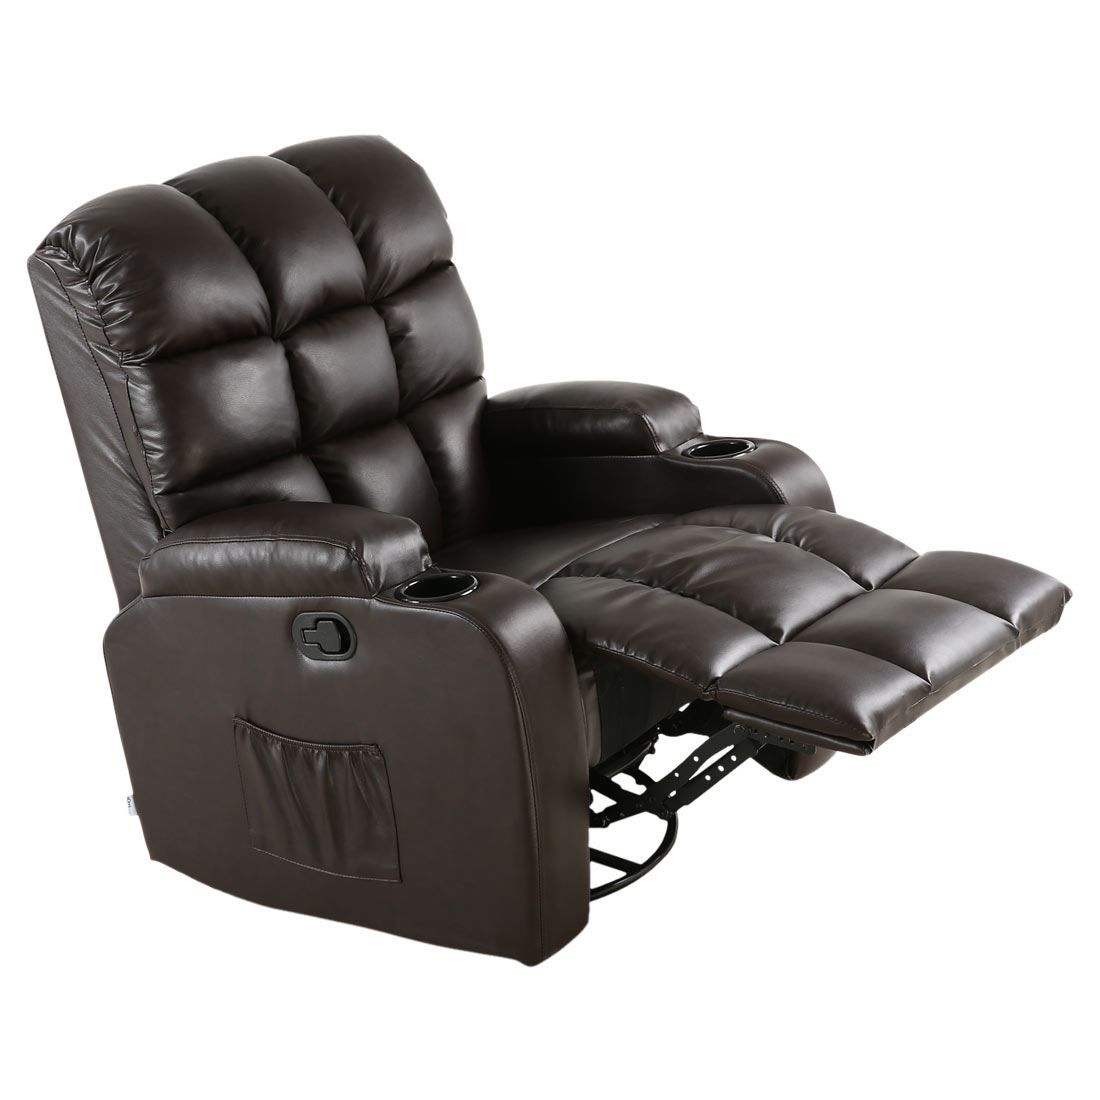 Regal Leather Recliner Chair Rocking Massage Swivel Heated For Gaming Sofa Chairs (View 1 of 15)